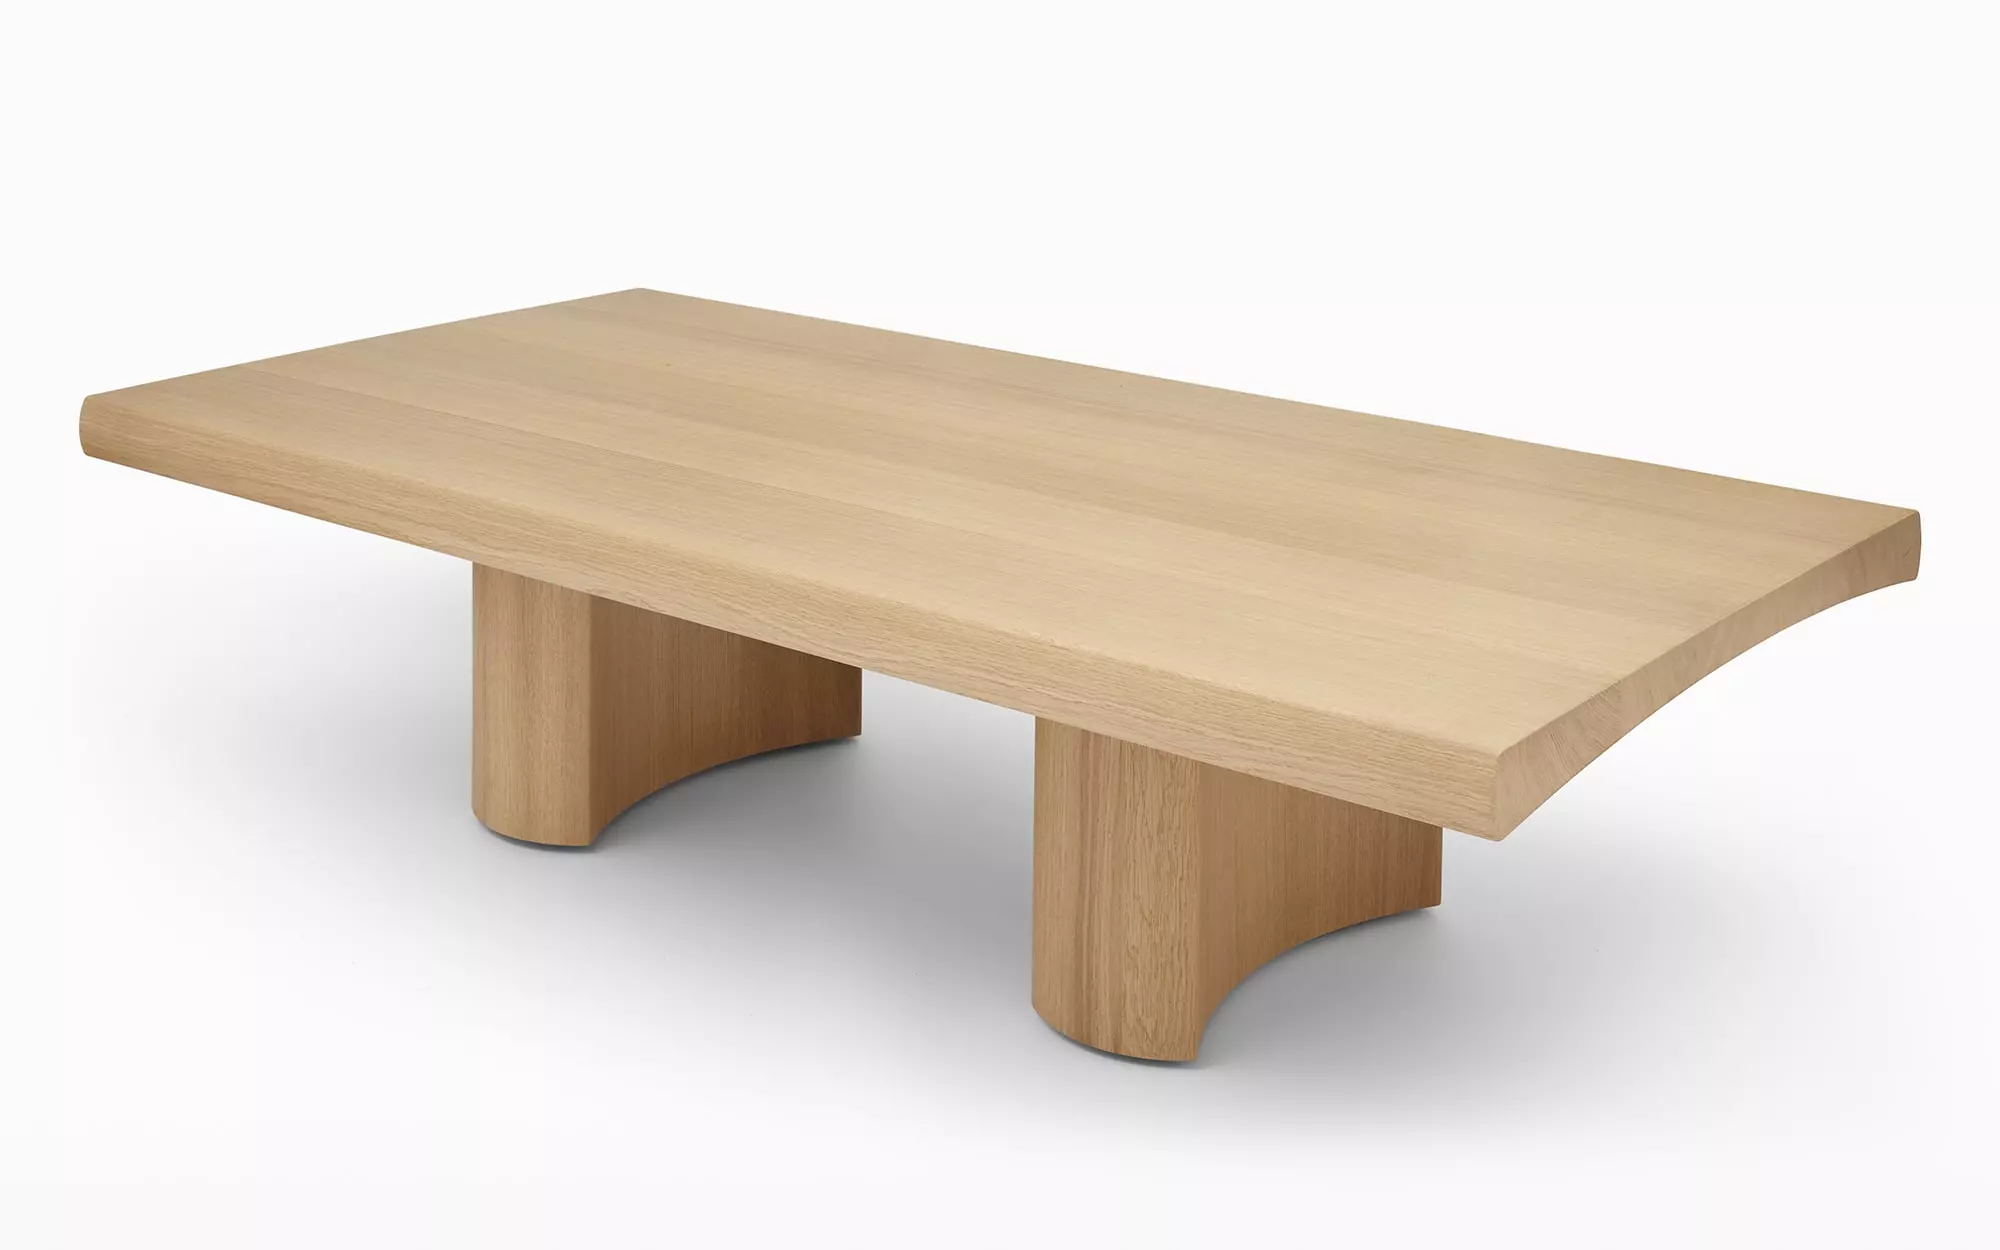 Hakone Coffee table - Edward and Jay Barber and Osgerby - Coffee table - Galerie kreo